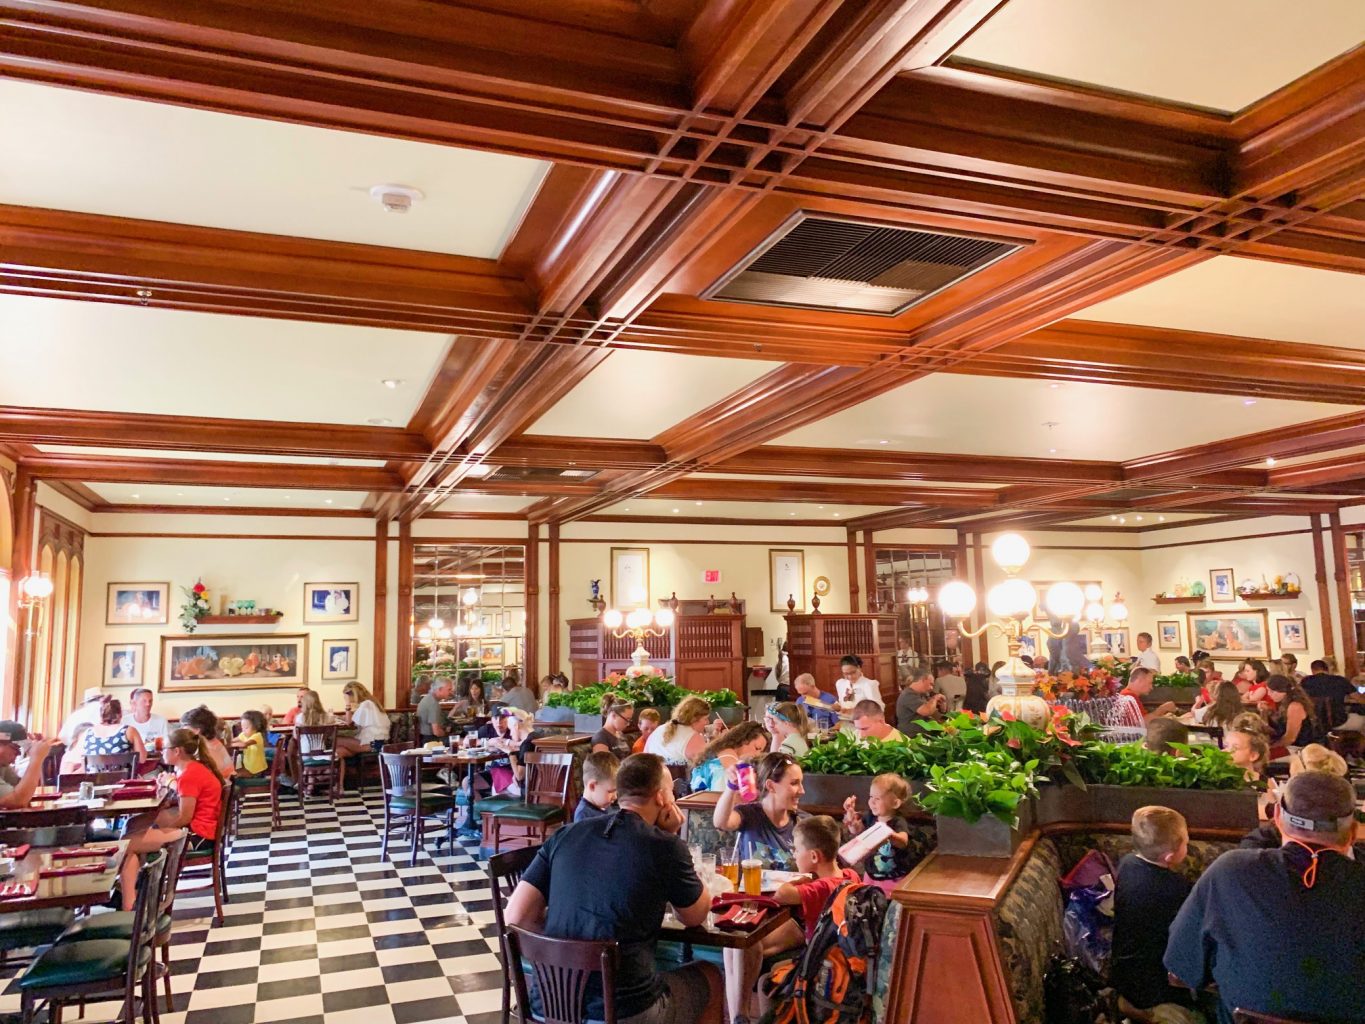 The interior of Tony's features wooden beams and outdoor plants, making it a cute location, but not one of the best Magic Kingdom Restaurants.